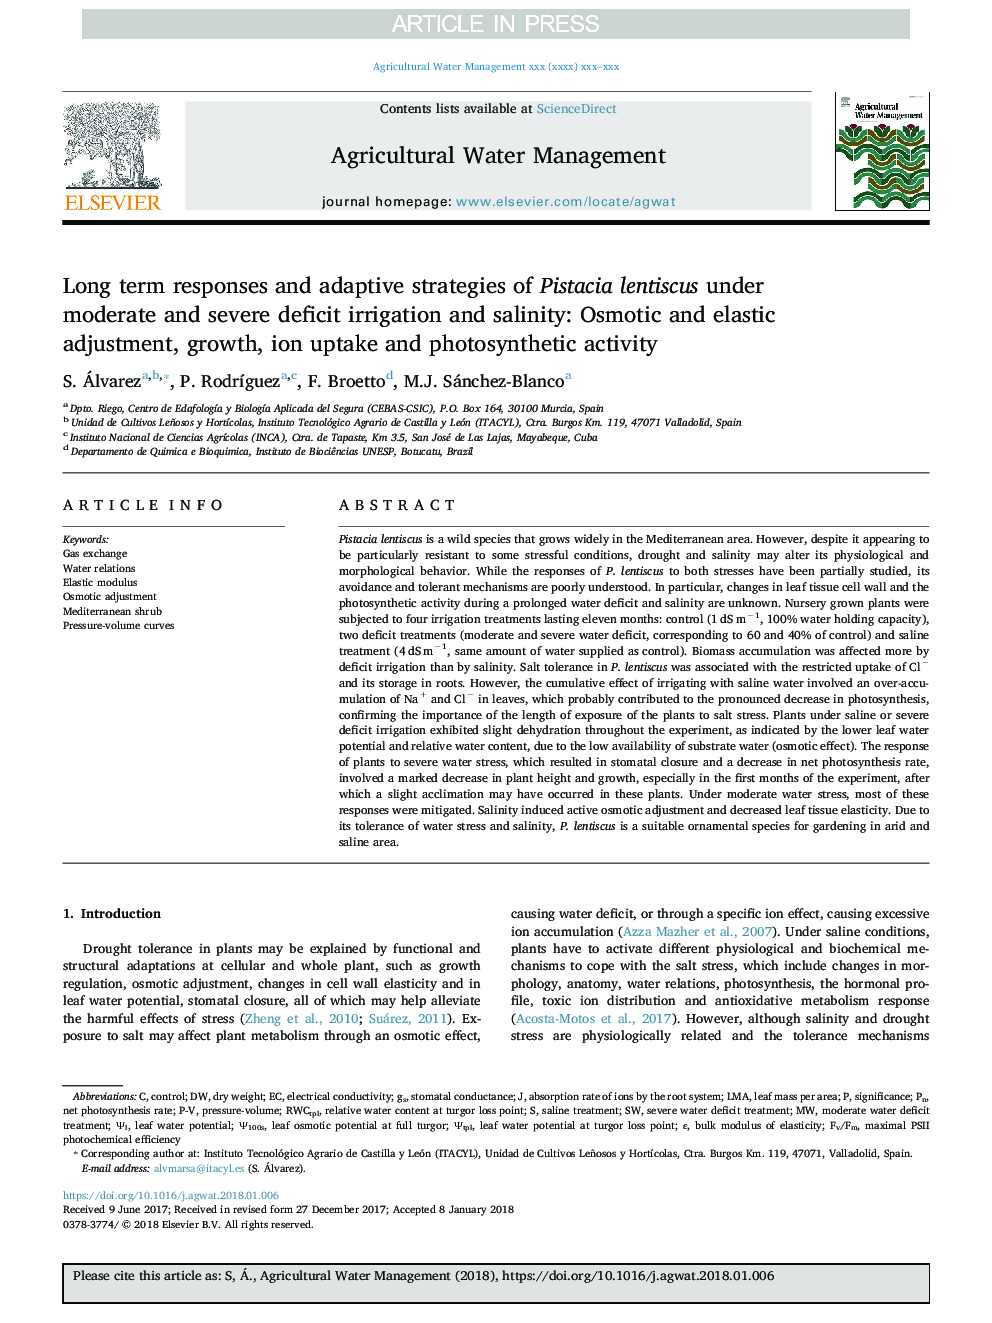 Long term responses and adaptive strategies of Pistacia lentiscus under moderate and severe deficit irrigation and salinity: Osmotic and elastic adjustment, growth, ion uptake and photosynthetic activity